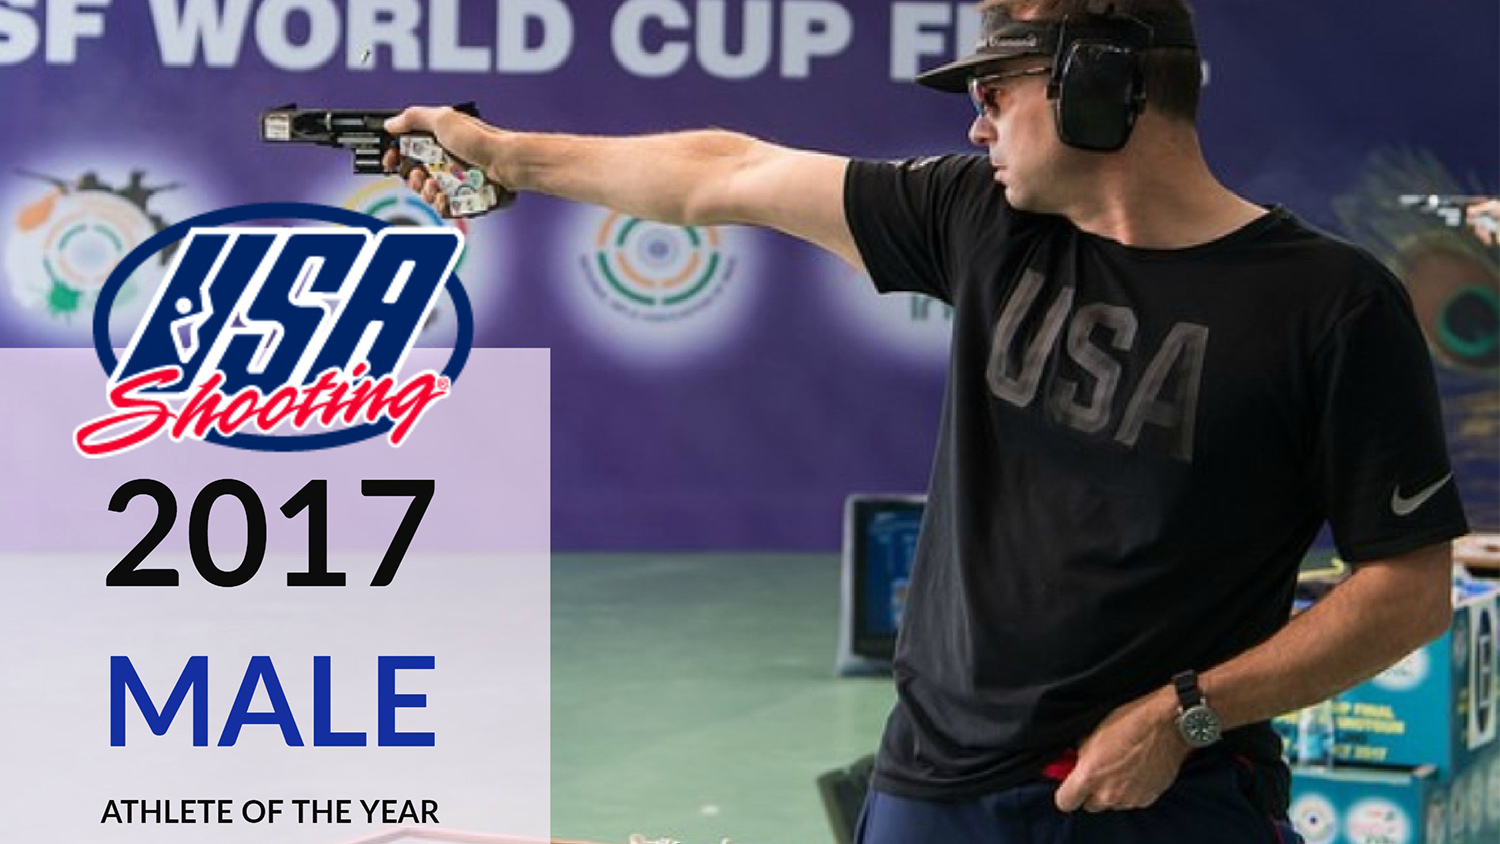 Keith Sanderson: 2017 USA Shooting Male Athlete of the Year